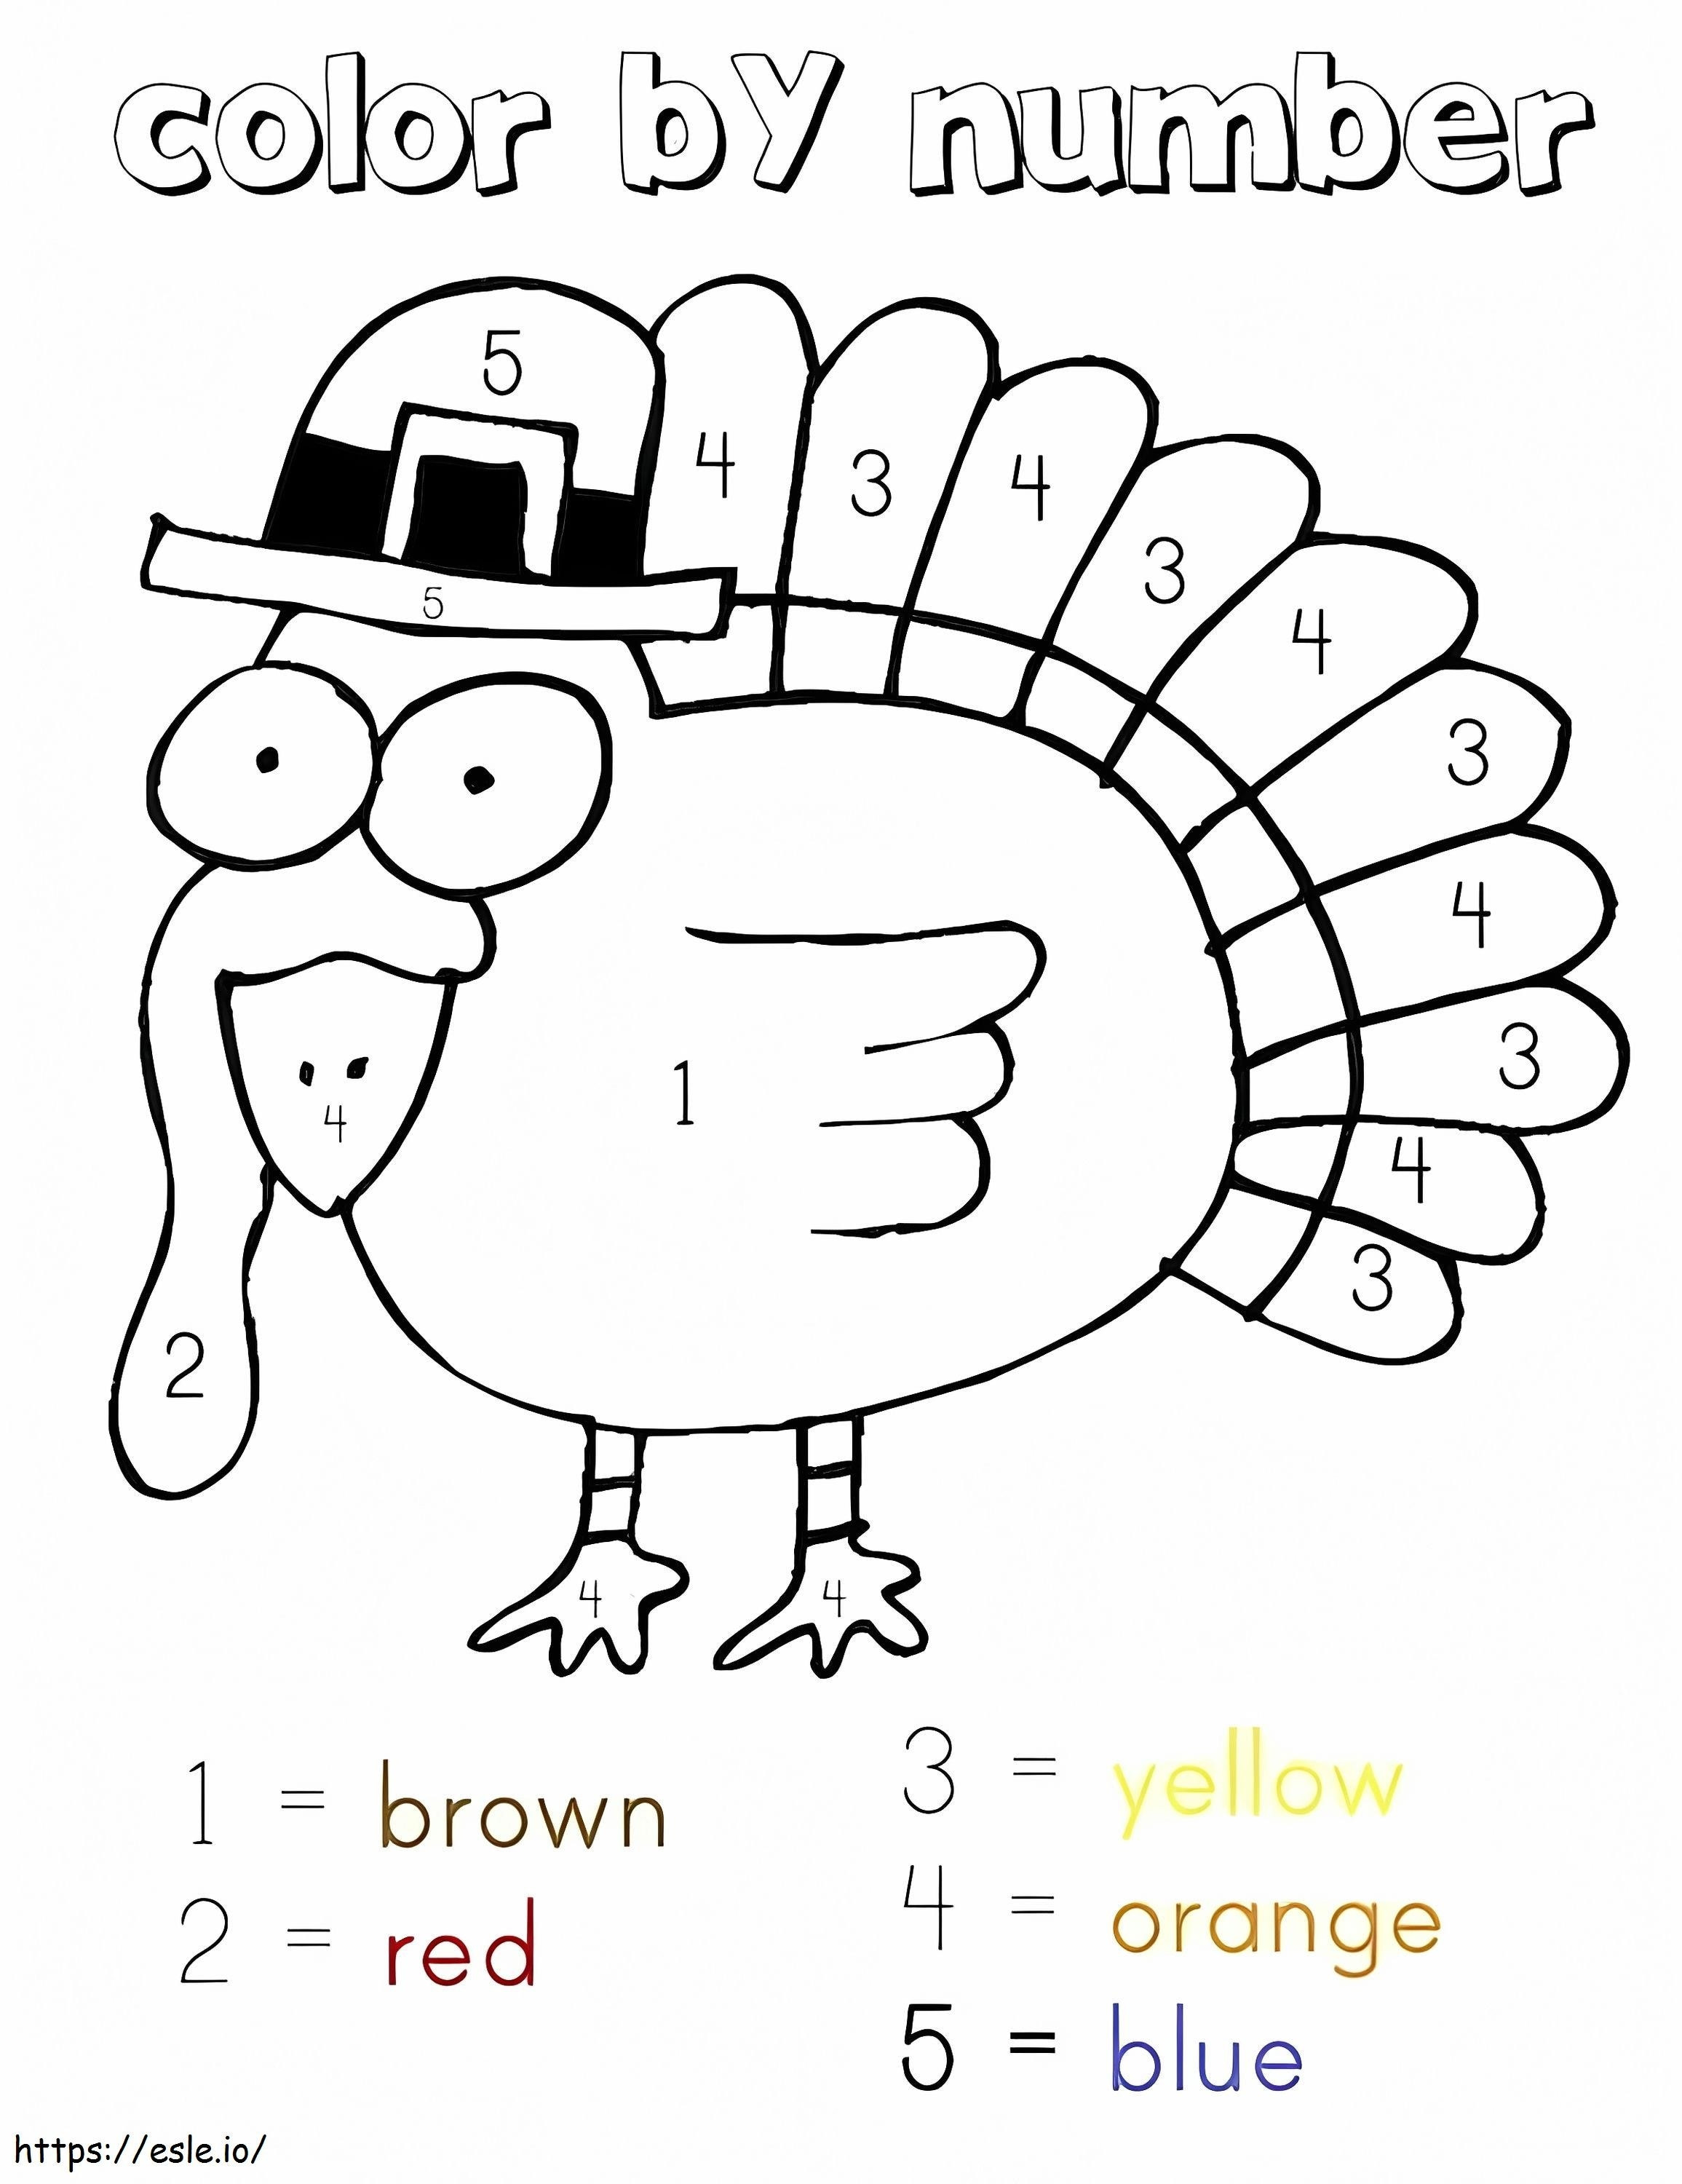 Funny Turkey Color By Number coloring page